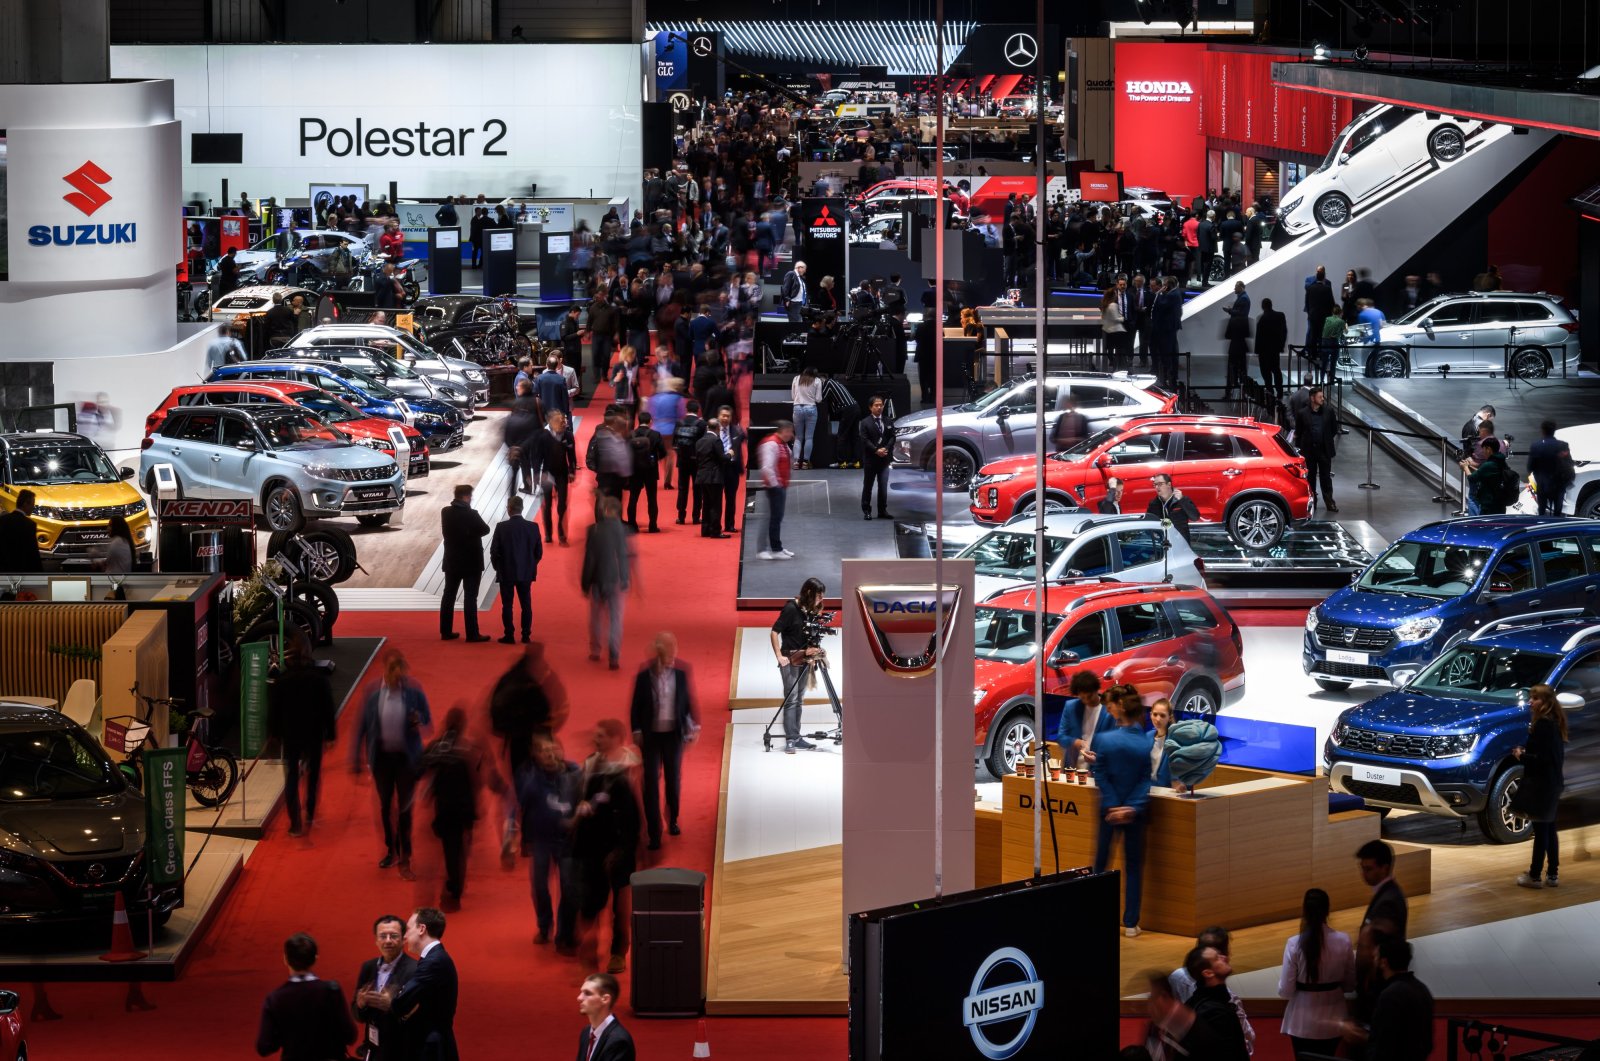 General view during a press day ahead of the Geneva International Motor Show in Geneva, Switzerland, March 5, 2019. (AFP Photo)